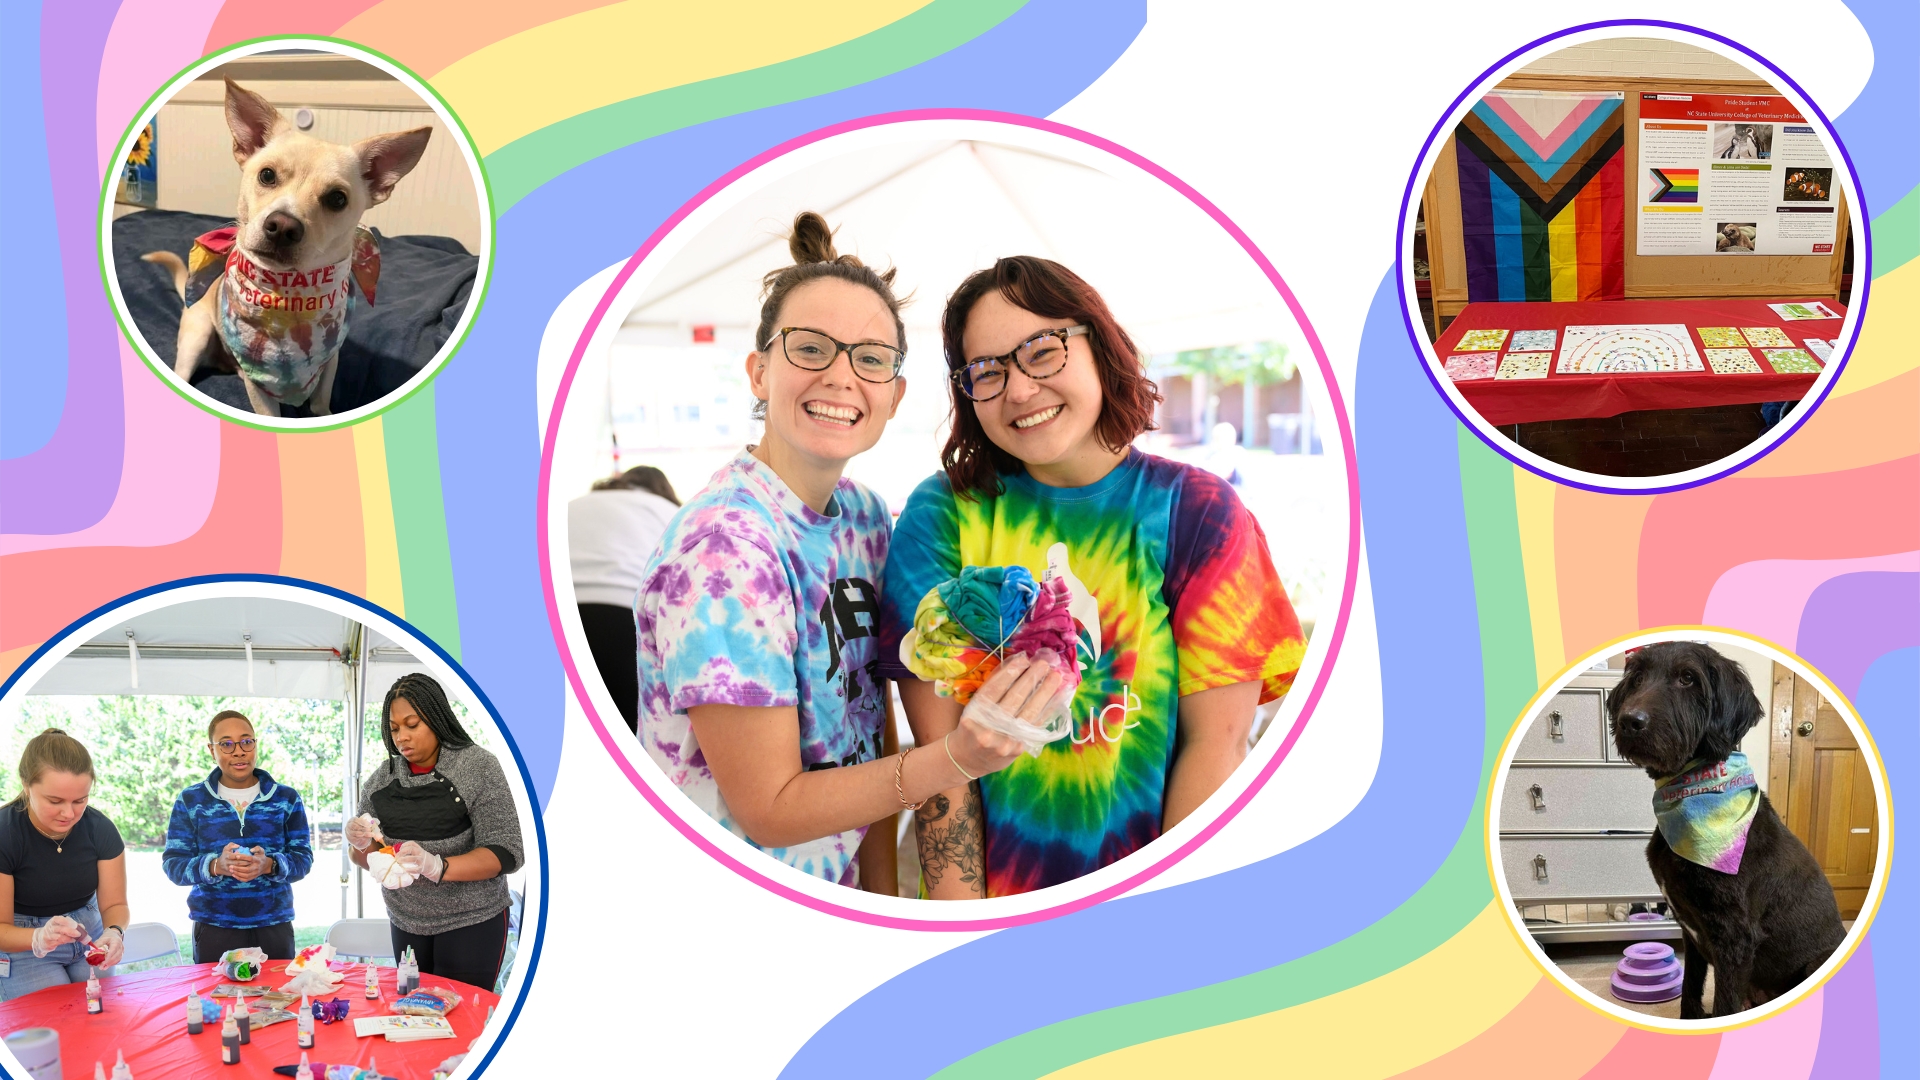 A graphic featuring five photos in colorful circular frames overlaid on a rainbow background. The photos are two women smiling with tie-dyed shirts, two dogs wearing tie-dyed bandanas, a Pride flag on a display board for the Pride Student Veterinary Medical Community, and three people tie-dyeing at one of the club's events.